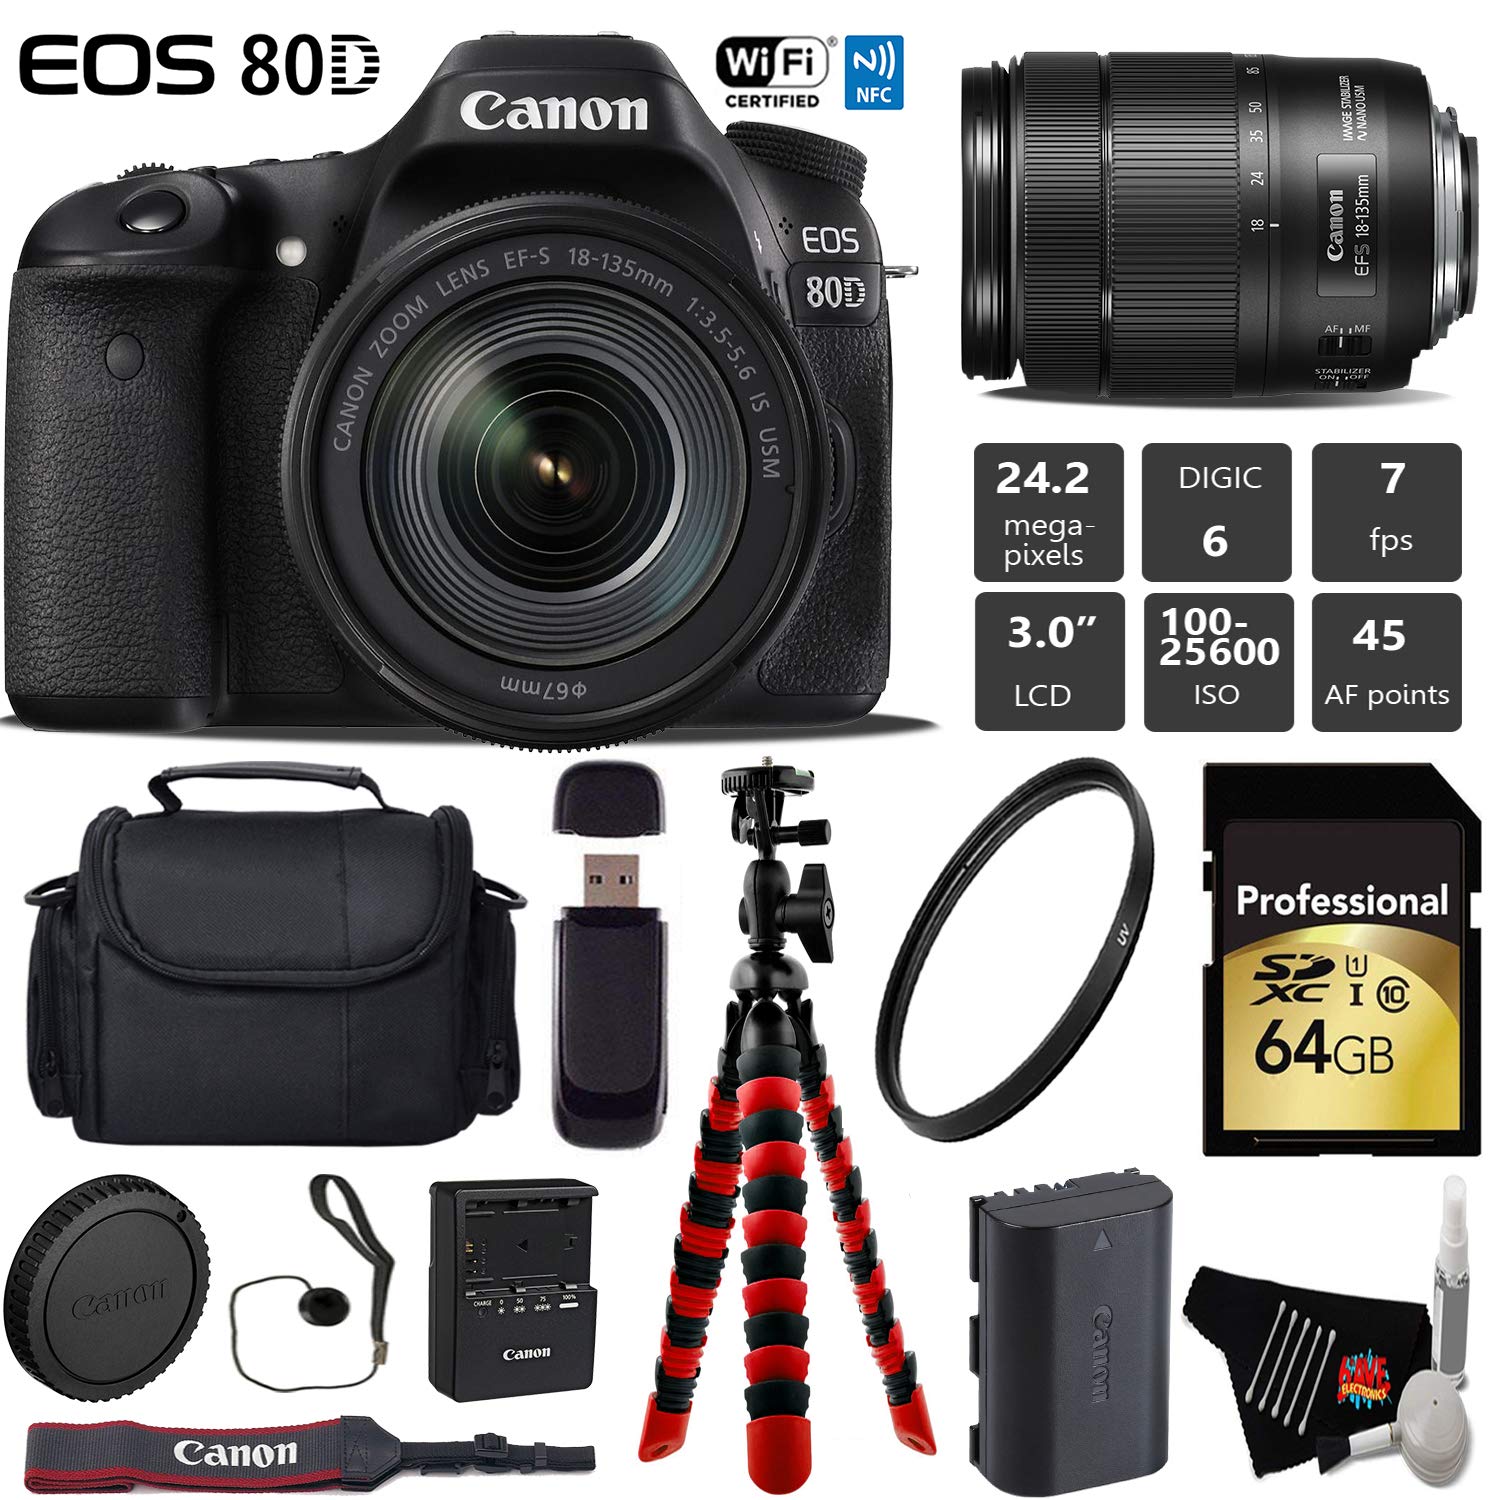 Canon EOS 80D DSLR Camera with 18-135mm is STM Lens + Flexible Tripod + UV Protection Filter + Professional Case + Card Pro Bundle